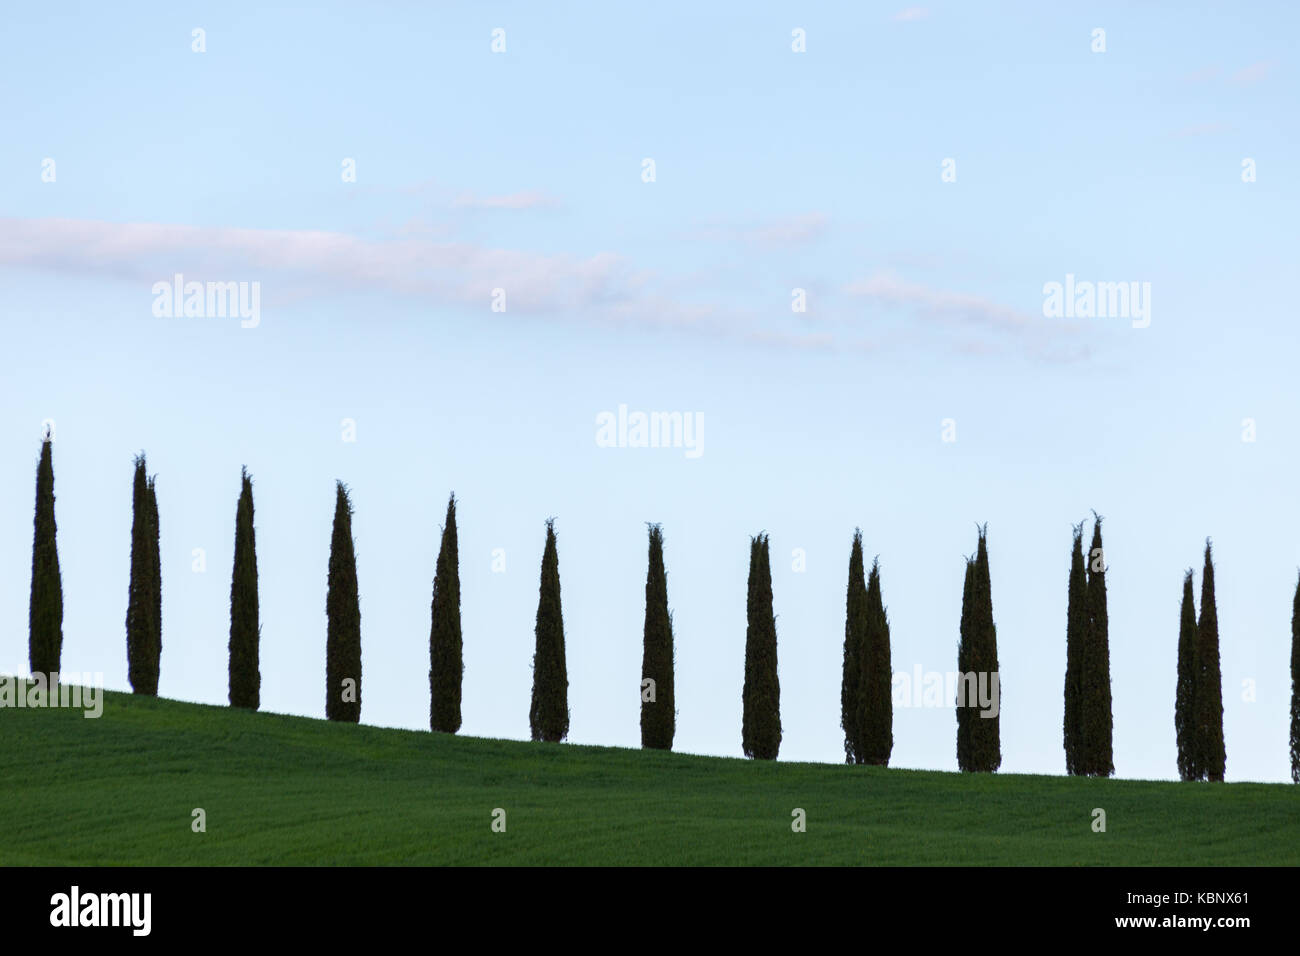 A line of cypresses following an hill profile, beneath a big, blue sky, with some sparse clouds Stock Photo